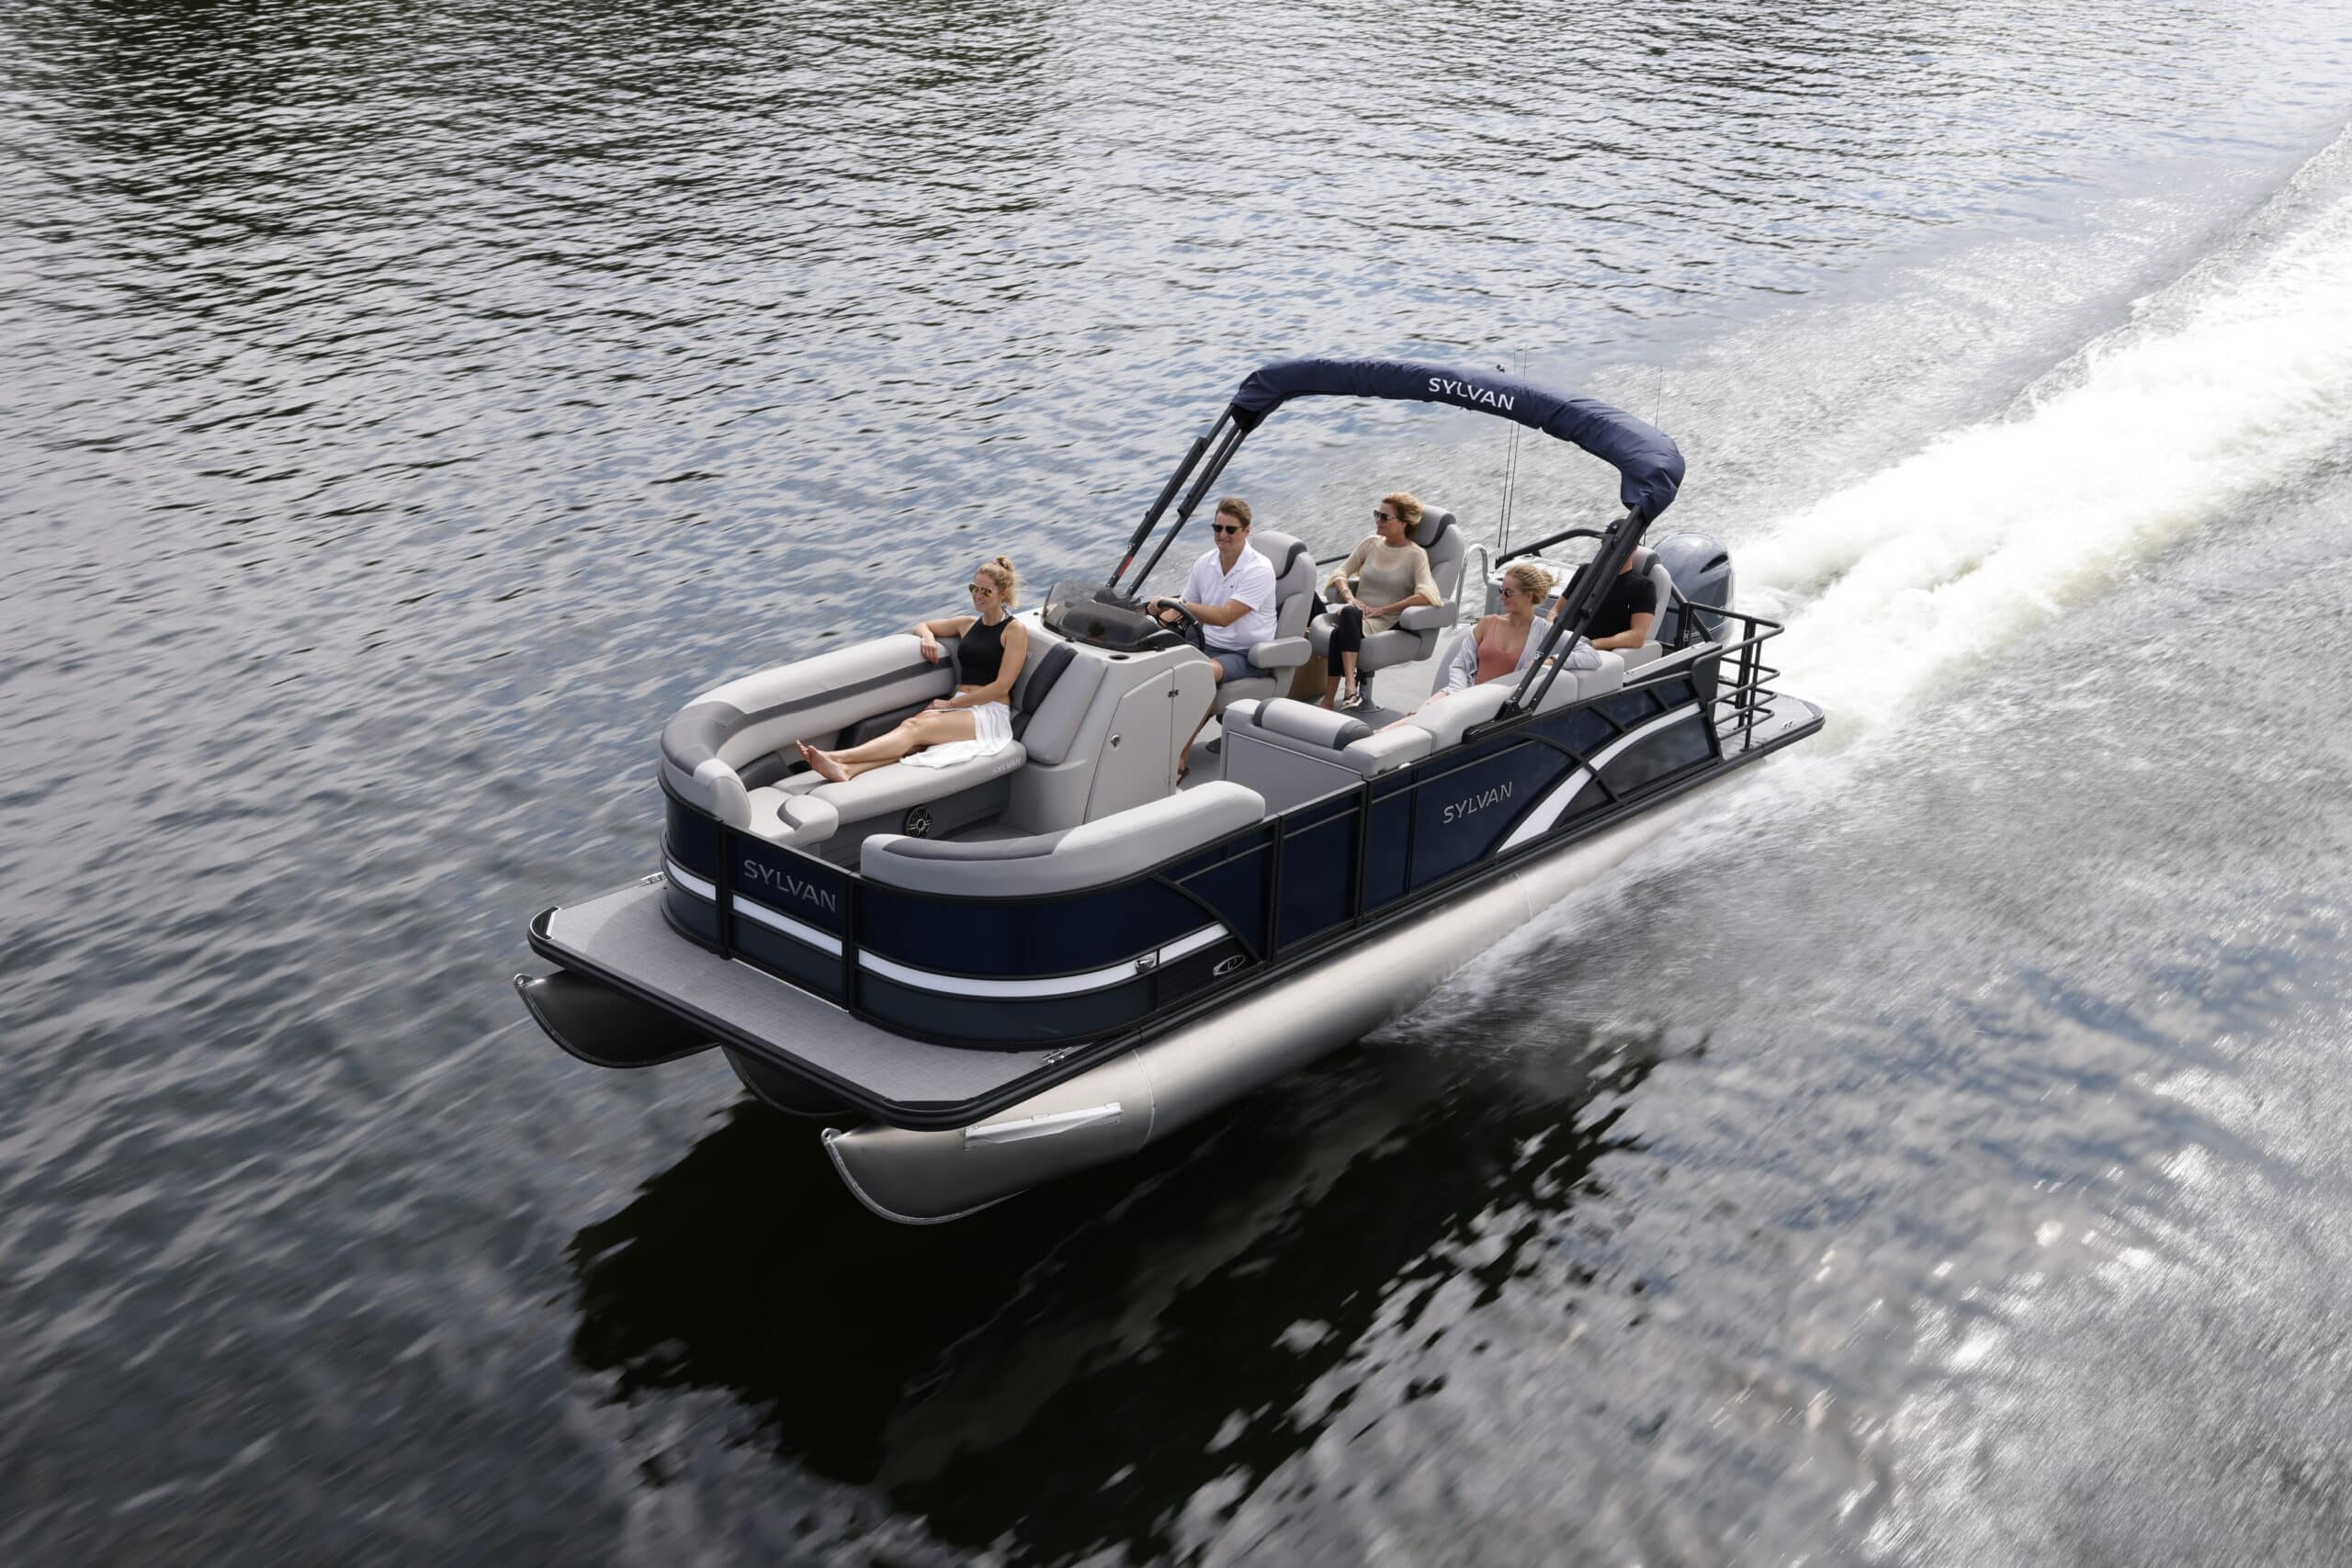 4 Reasons Why Sylvan Pontoon Boats are the Perfect Choice for Your